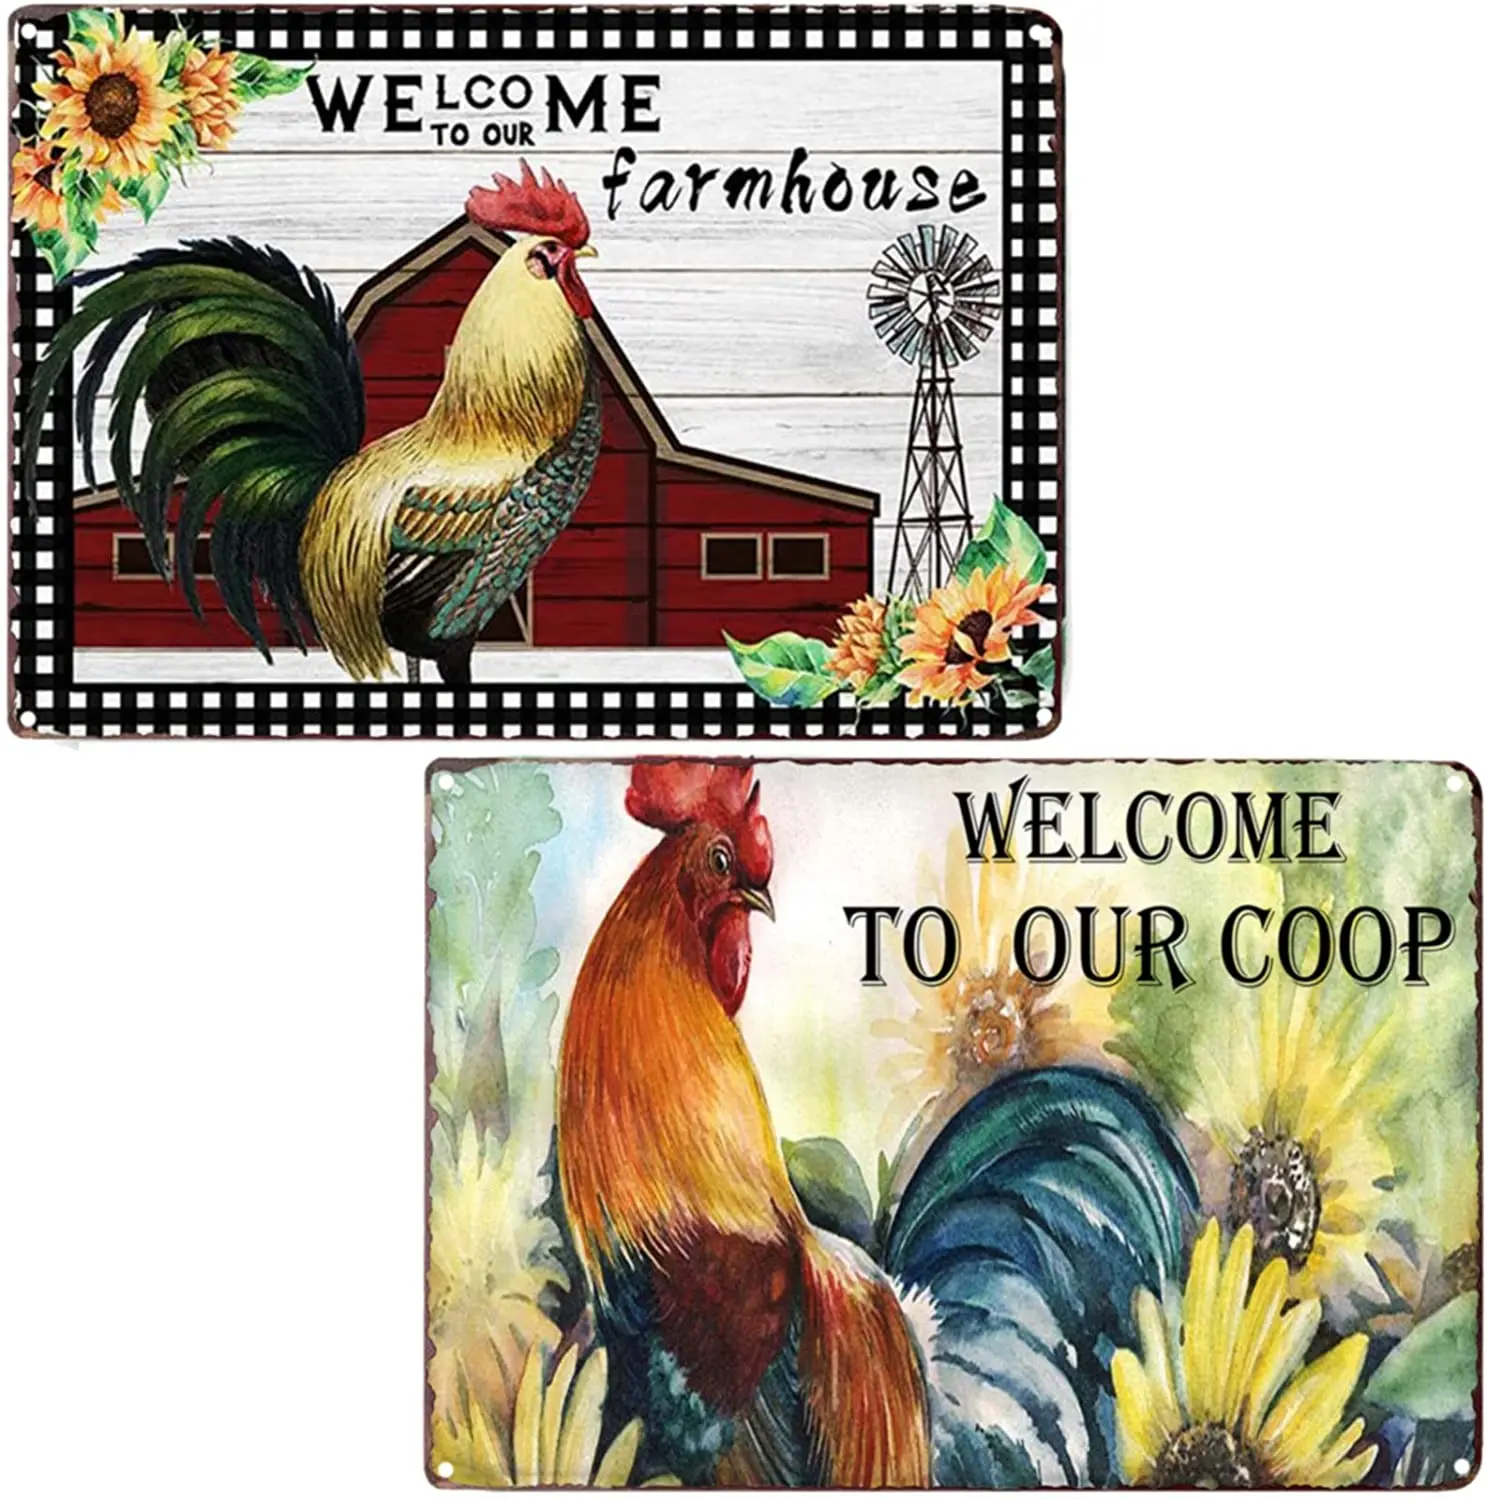 

TISOSO Welcome to Our Farmhouse Coop Funny Chicken Sign Retro Vintage Metal Tin Signs Wall Plaque Farm House Country Home